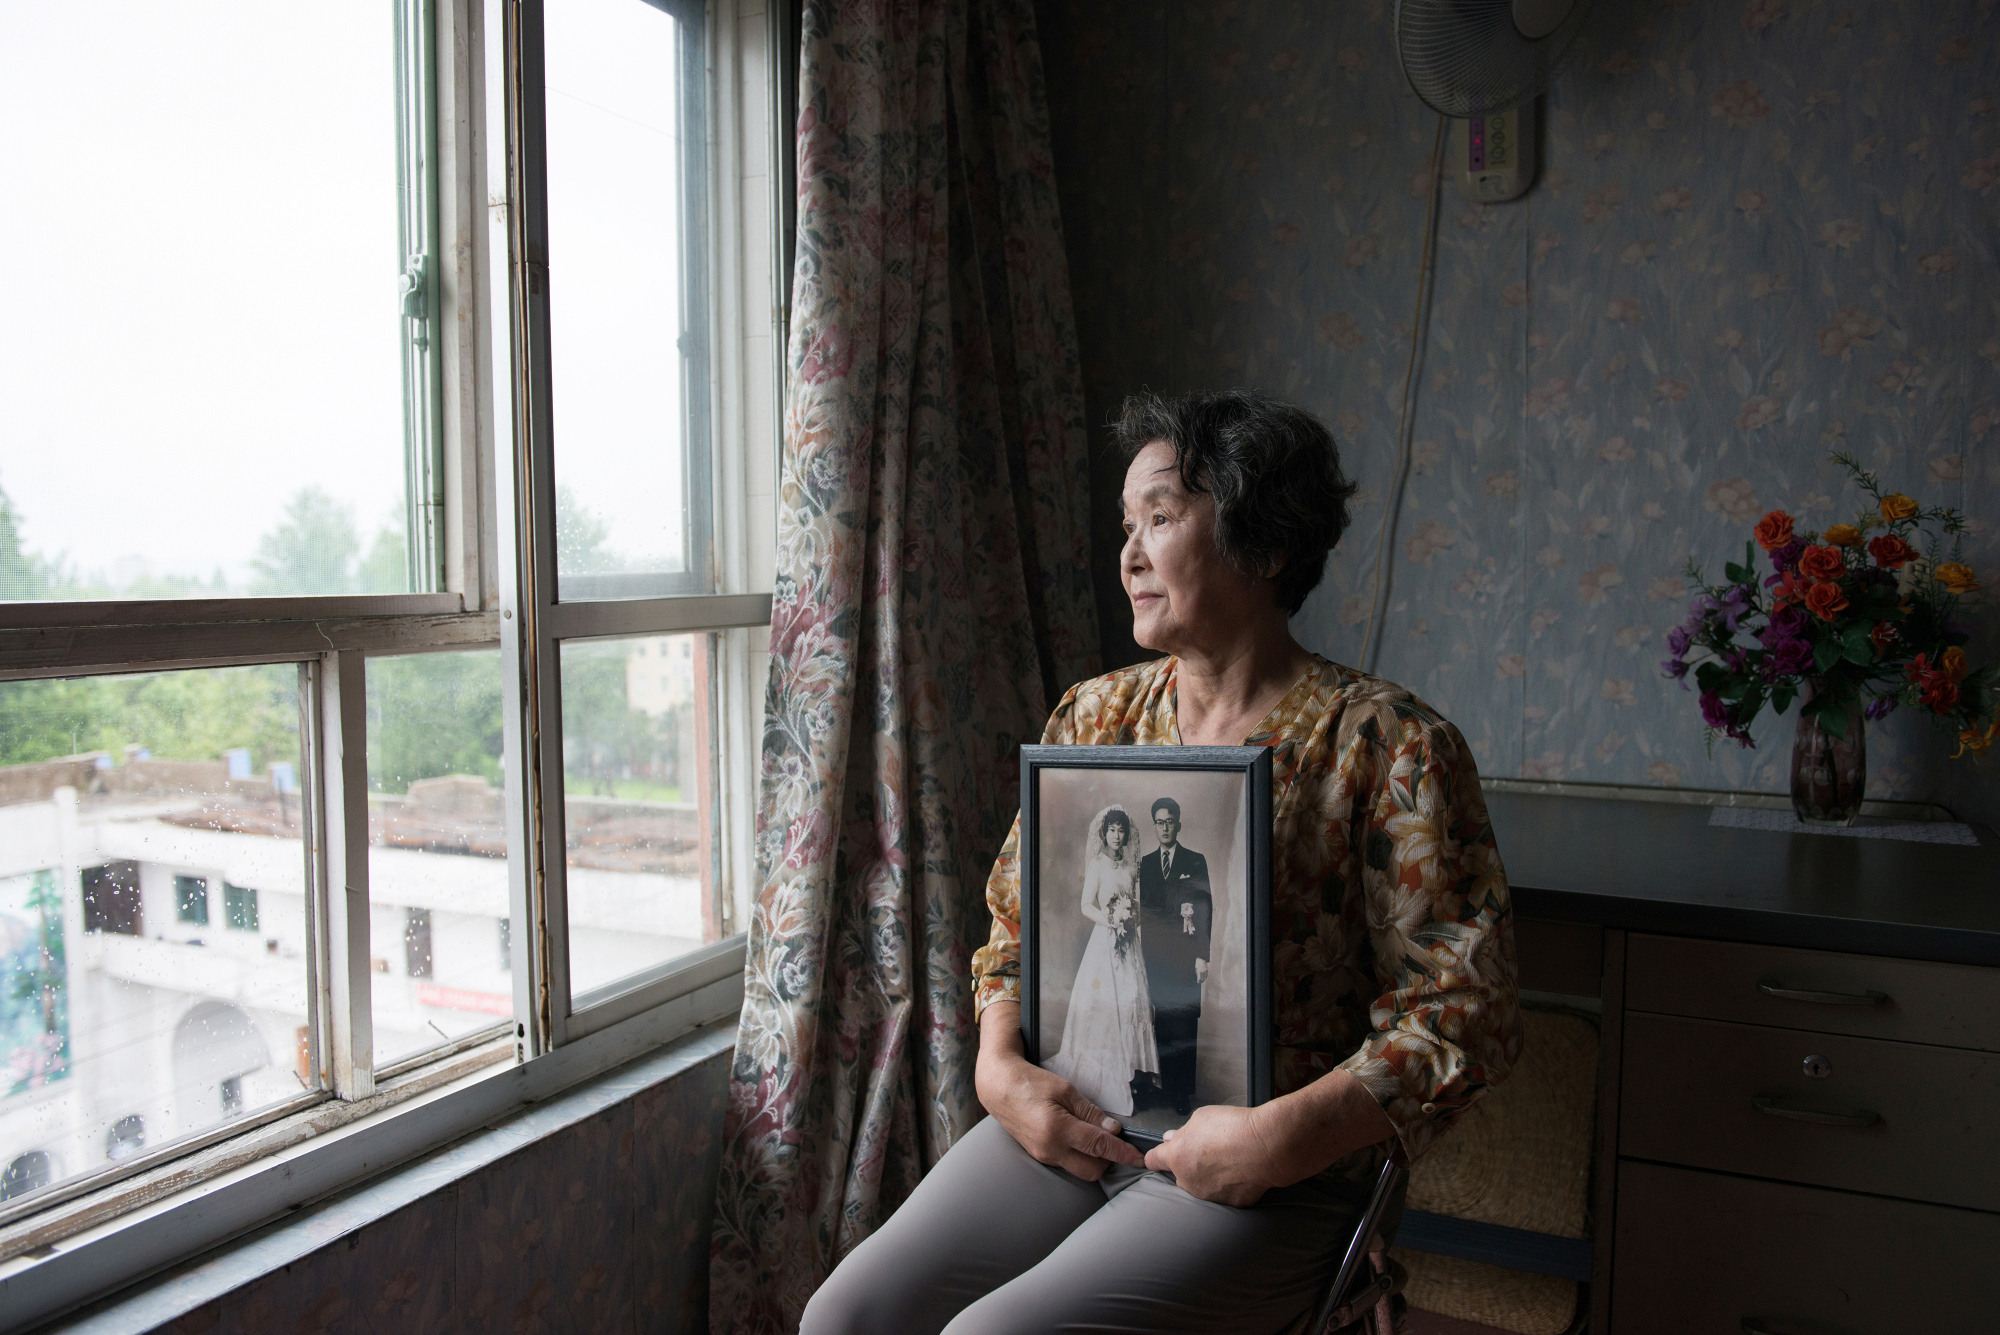 Mitsuko Minakawa, one of the Japanese wives who moved to North Korea, holds her wedding picture, taken in 1960 in Hakodate, Hokkaido, at her apartment in Wonsan in August 2016. | COURTESY NORIKO HAYASHI VIA KYODO